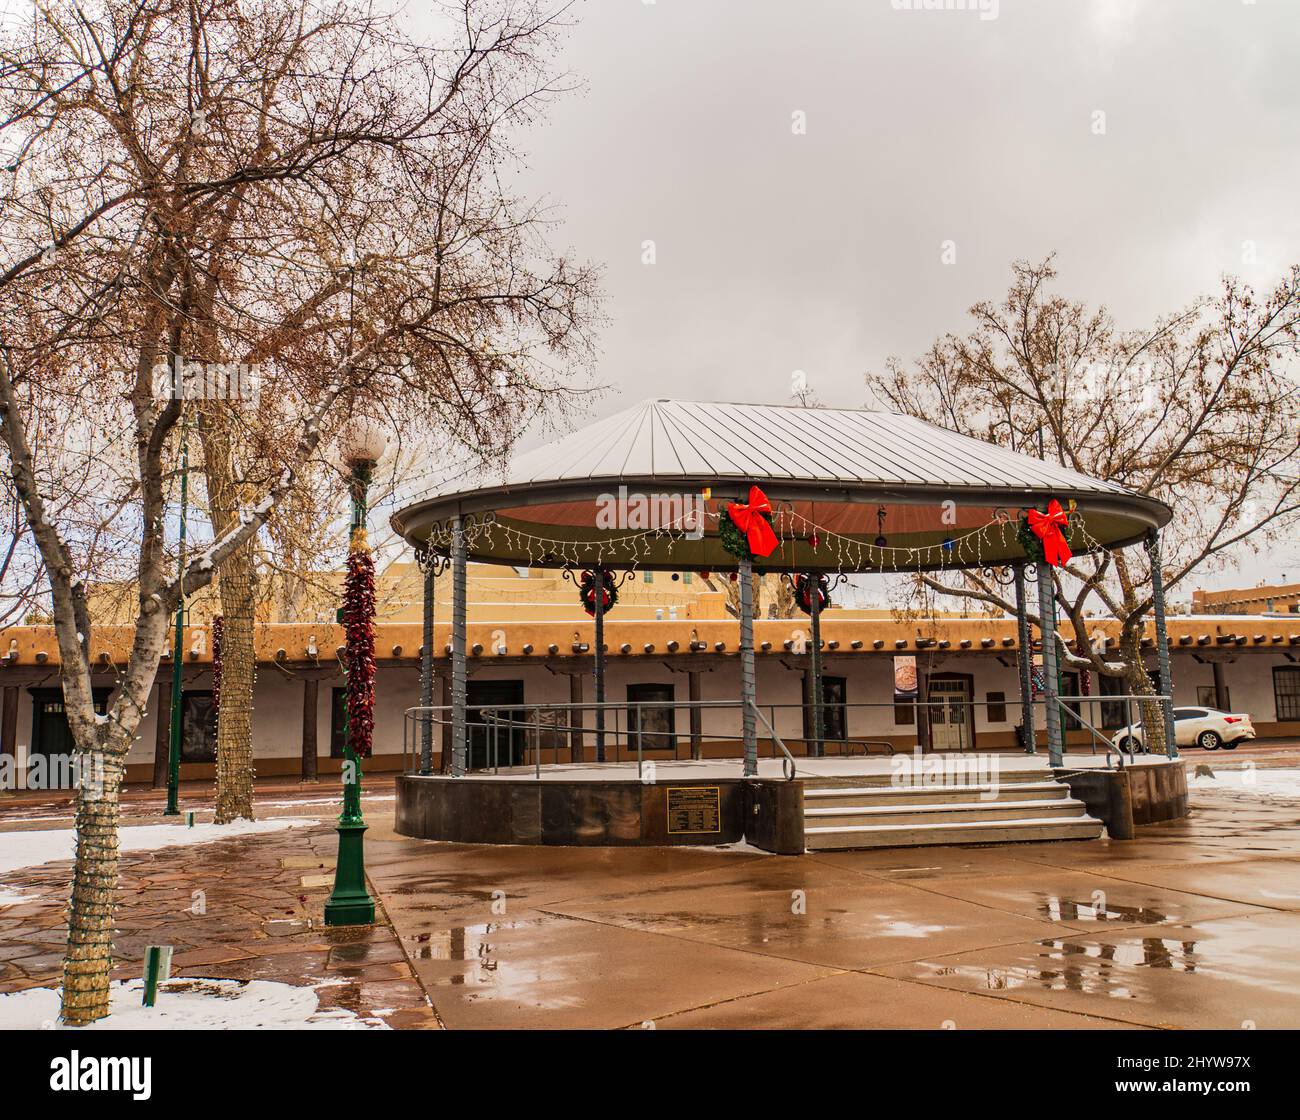 Santa Fe bandstand decorated for Christmas holidays on a cold winter morning in the historic Plaza of Santa Fe, New Mexico Stock Photo